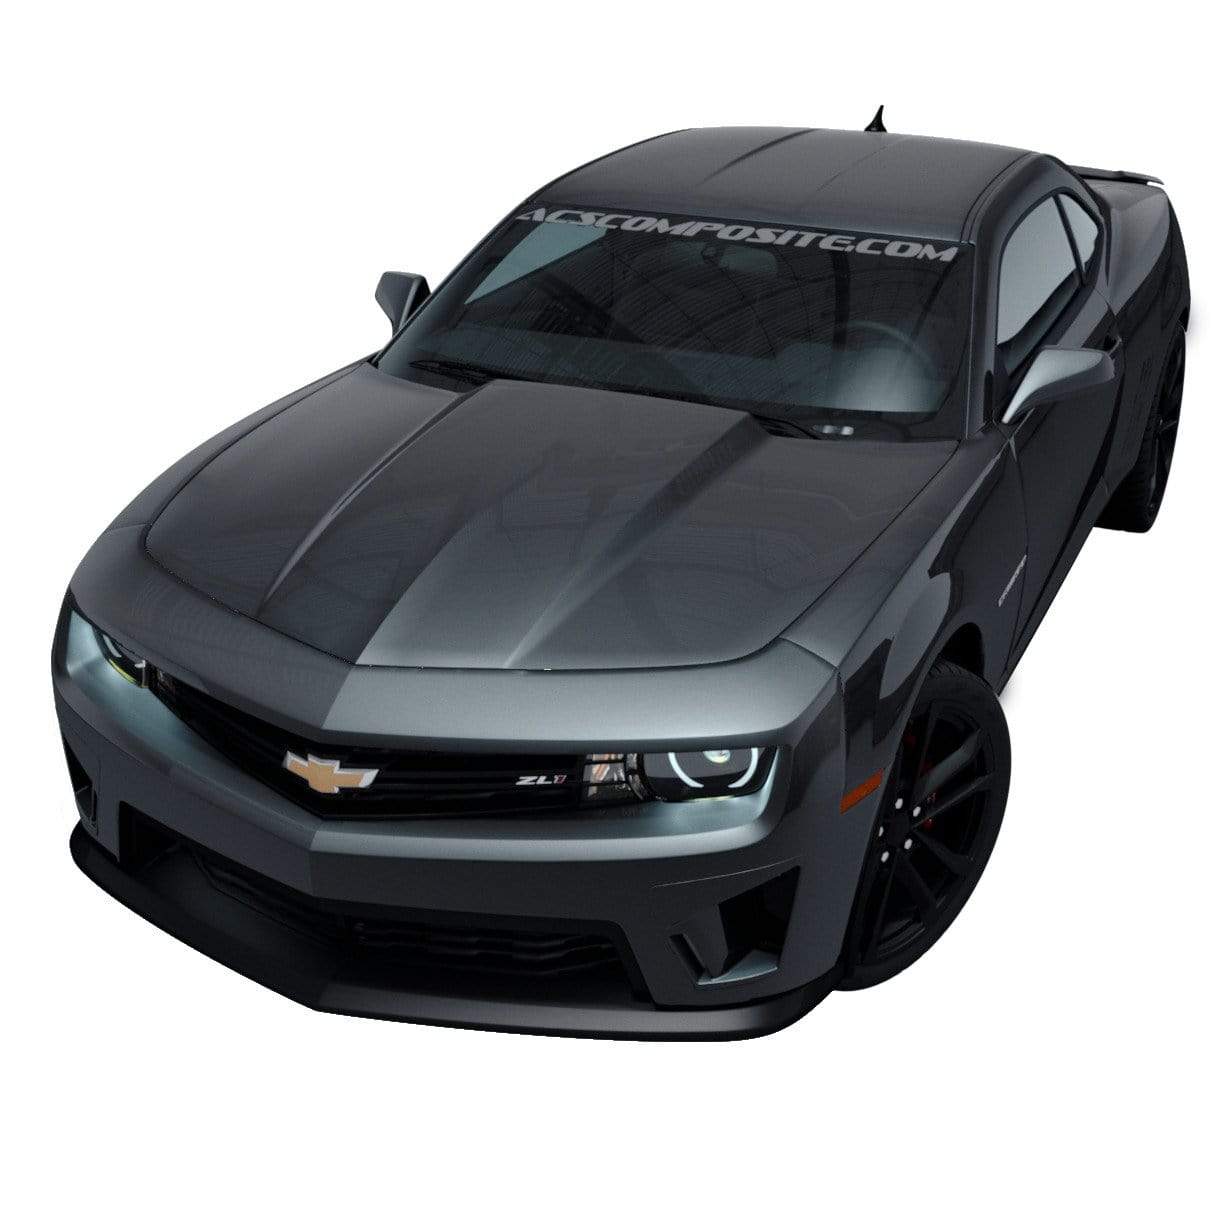 ACS Composite T1 Bumper Port System for Camaro ZL1 [33-4-105]PRM[33-4-082]: Enhance Front End Appearance and Engine Airflow